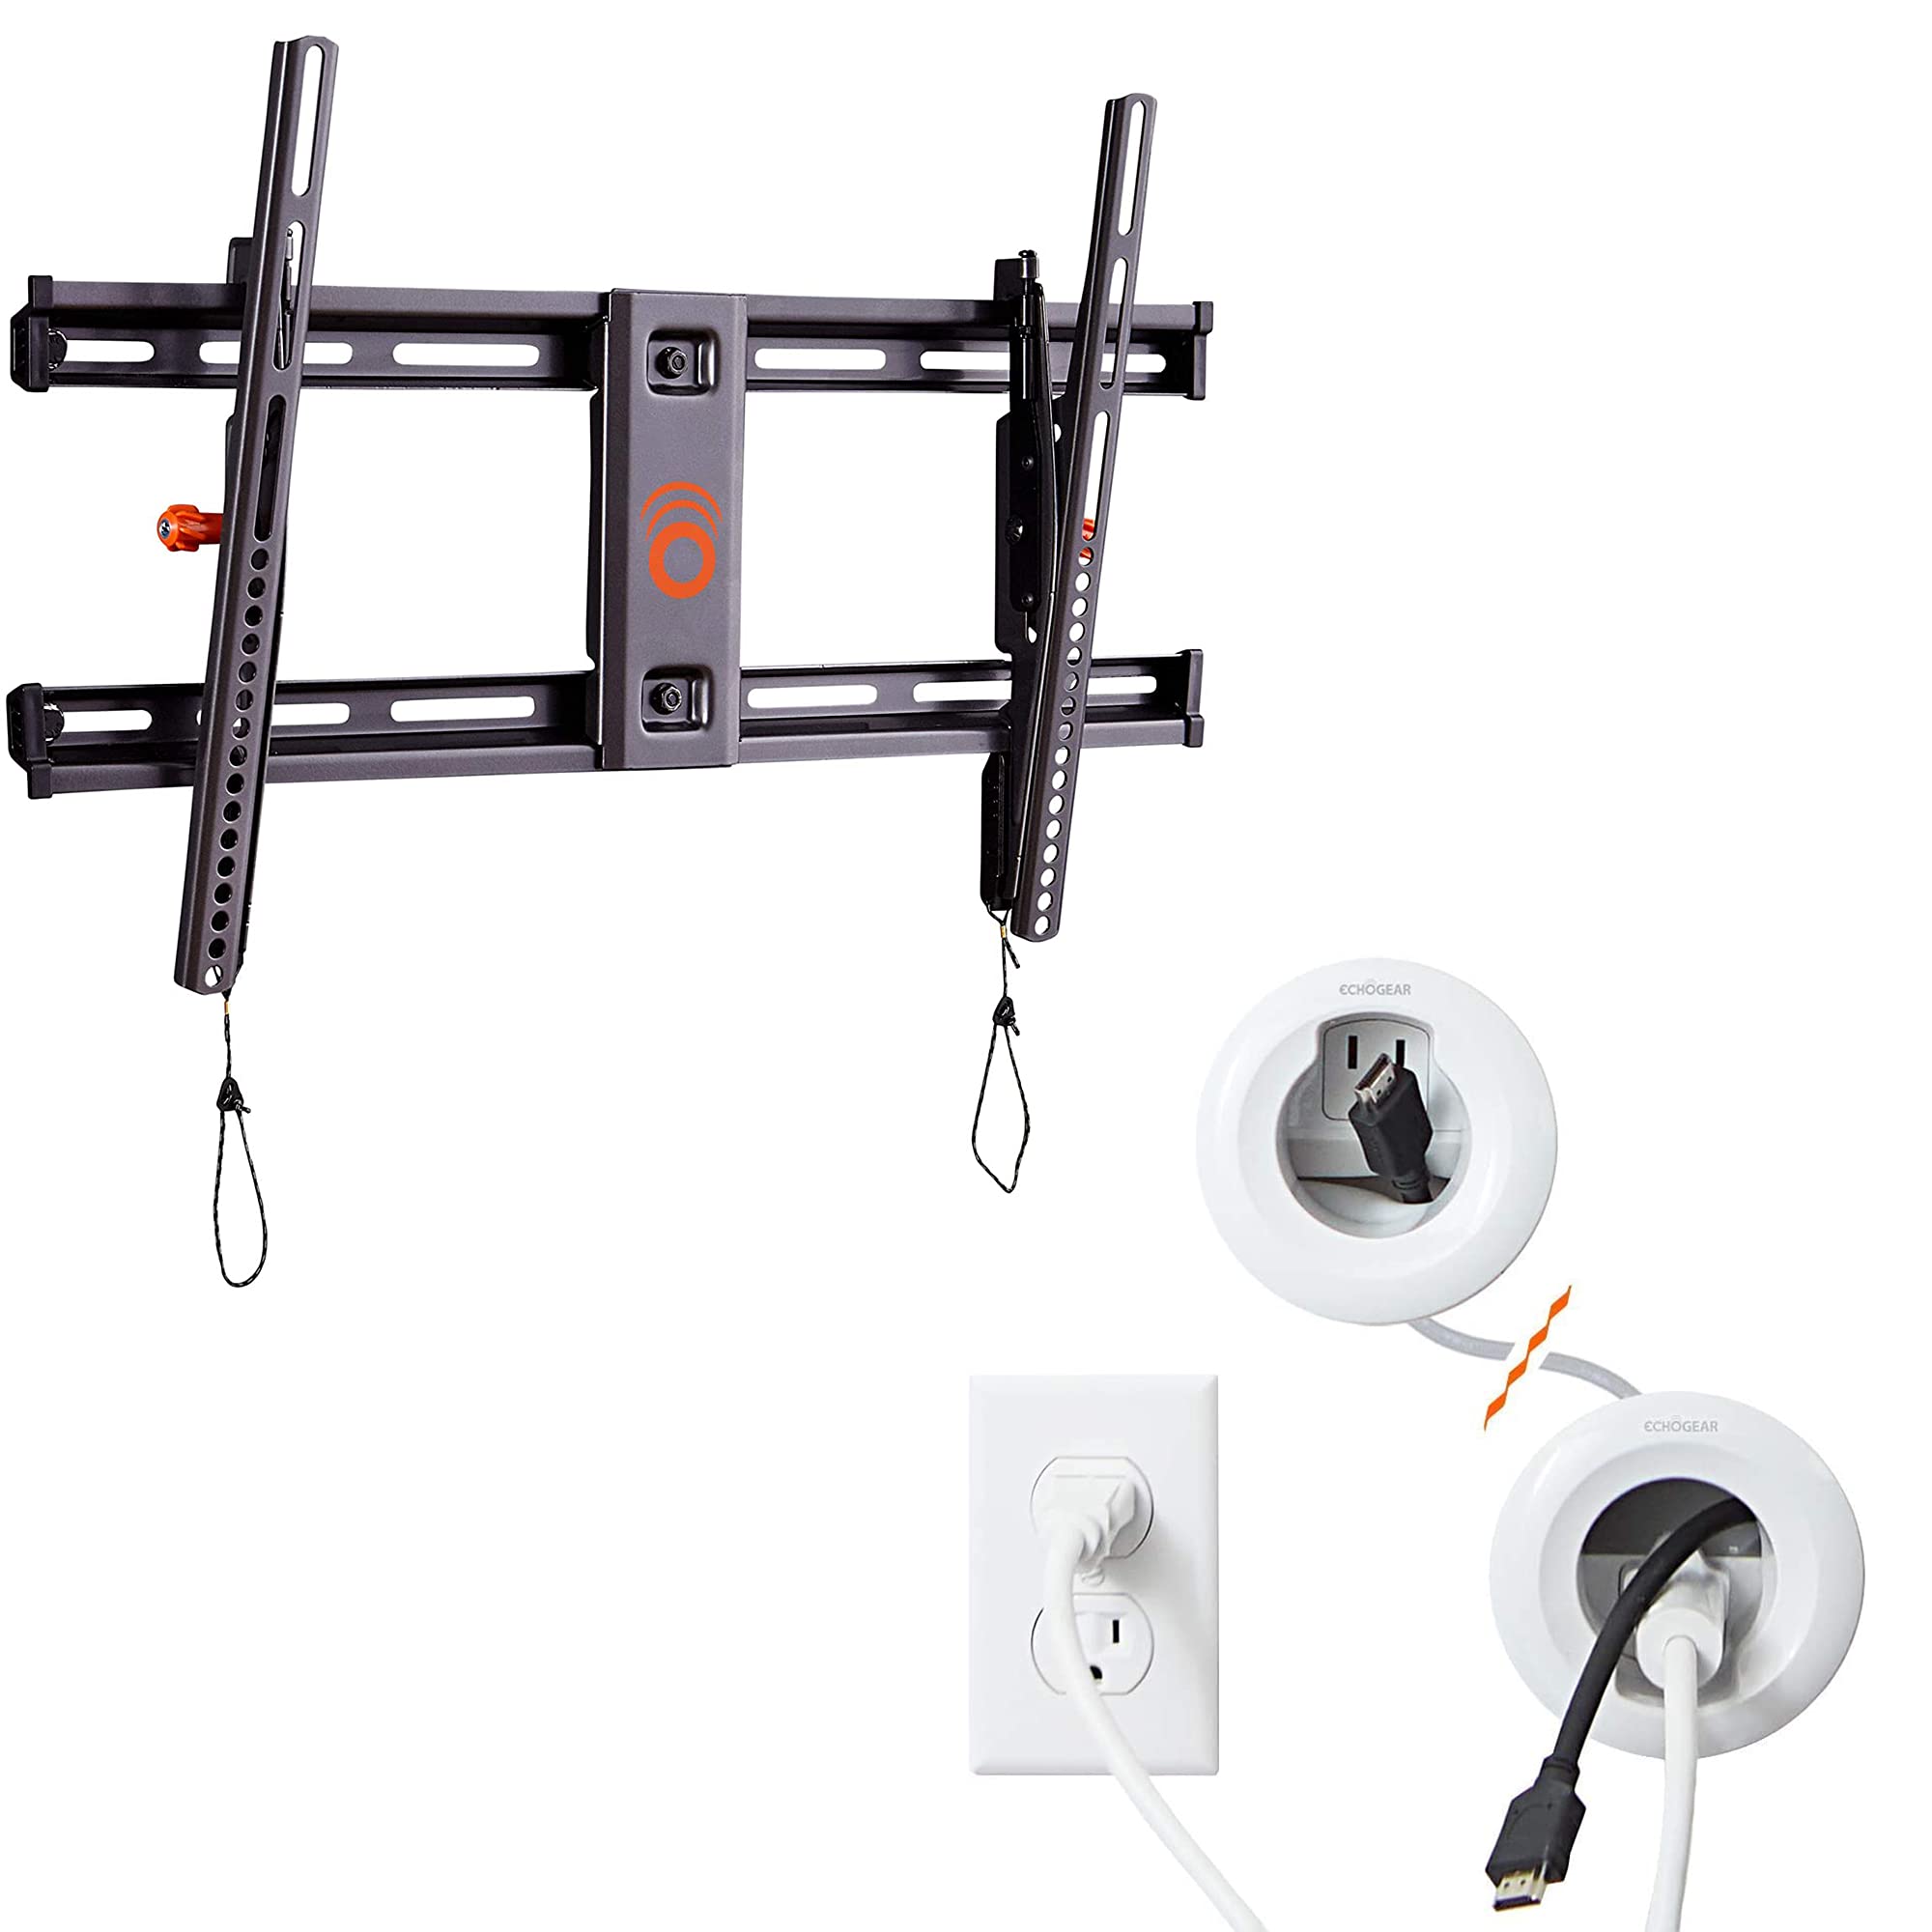 ECHOGEAR Tilting TV Wall Mount with Low Profile & in-Wall Cable Management Kit - for TVs Up to 90